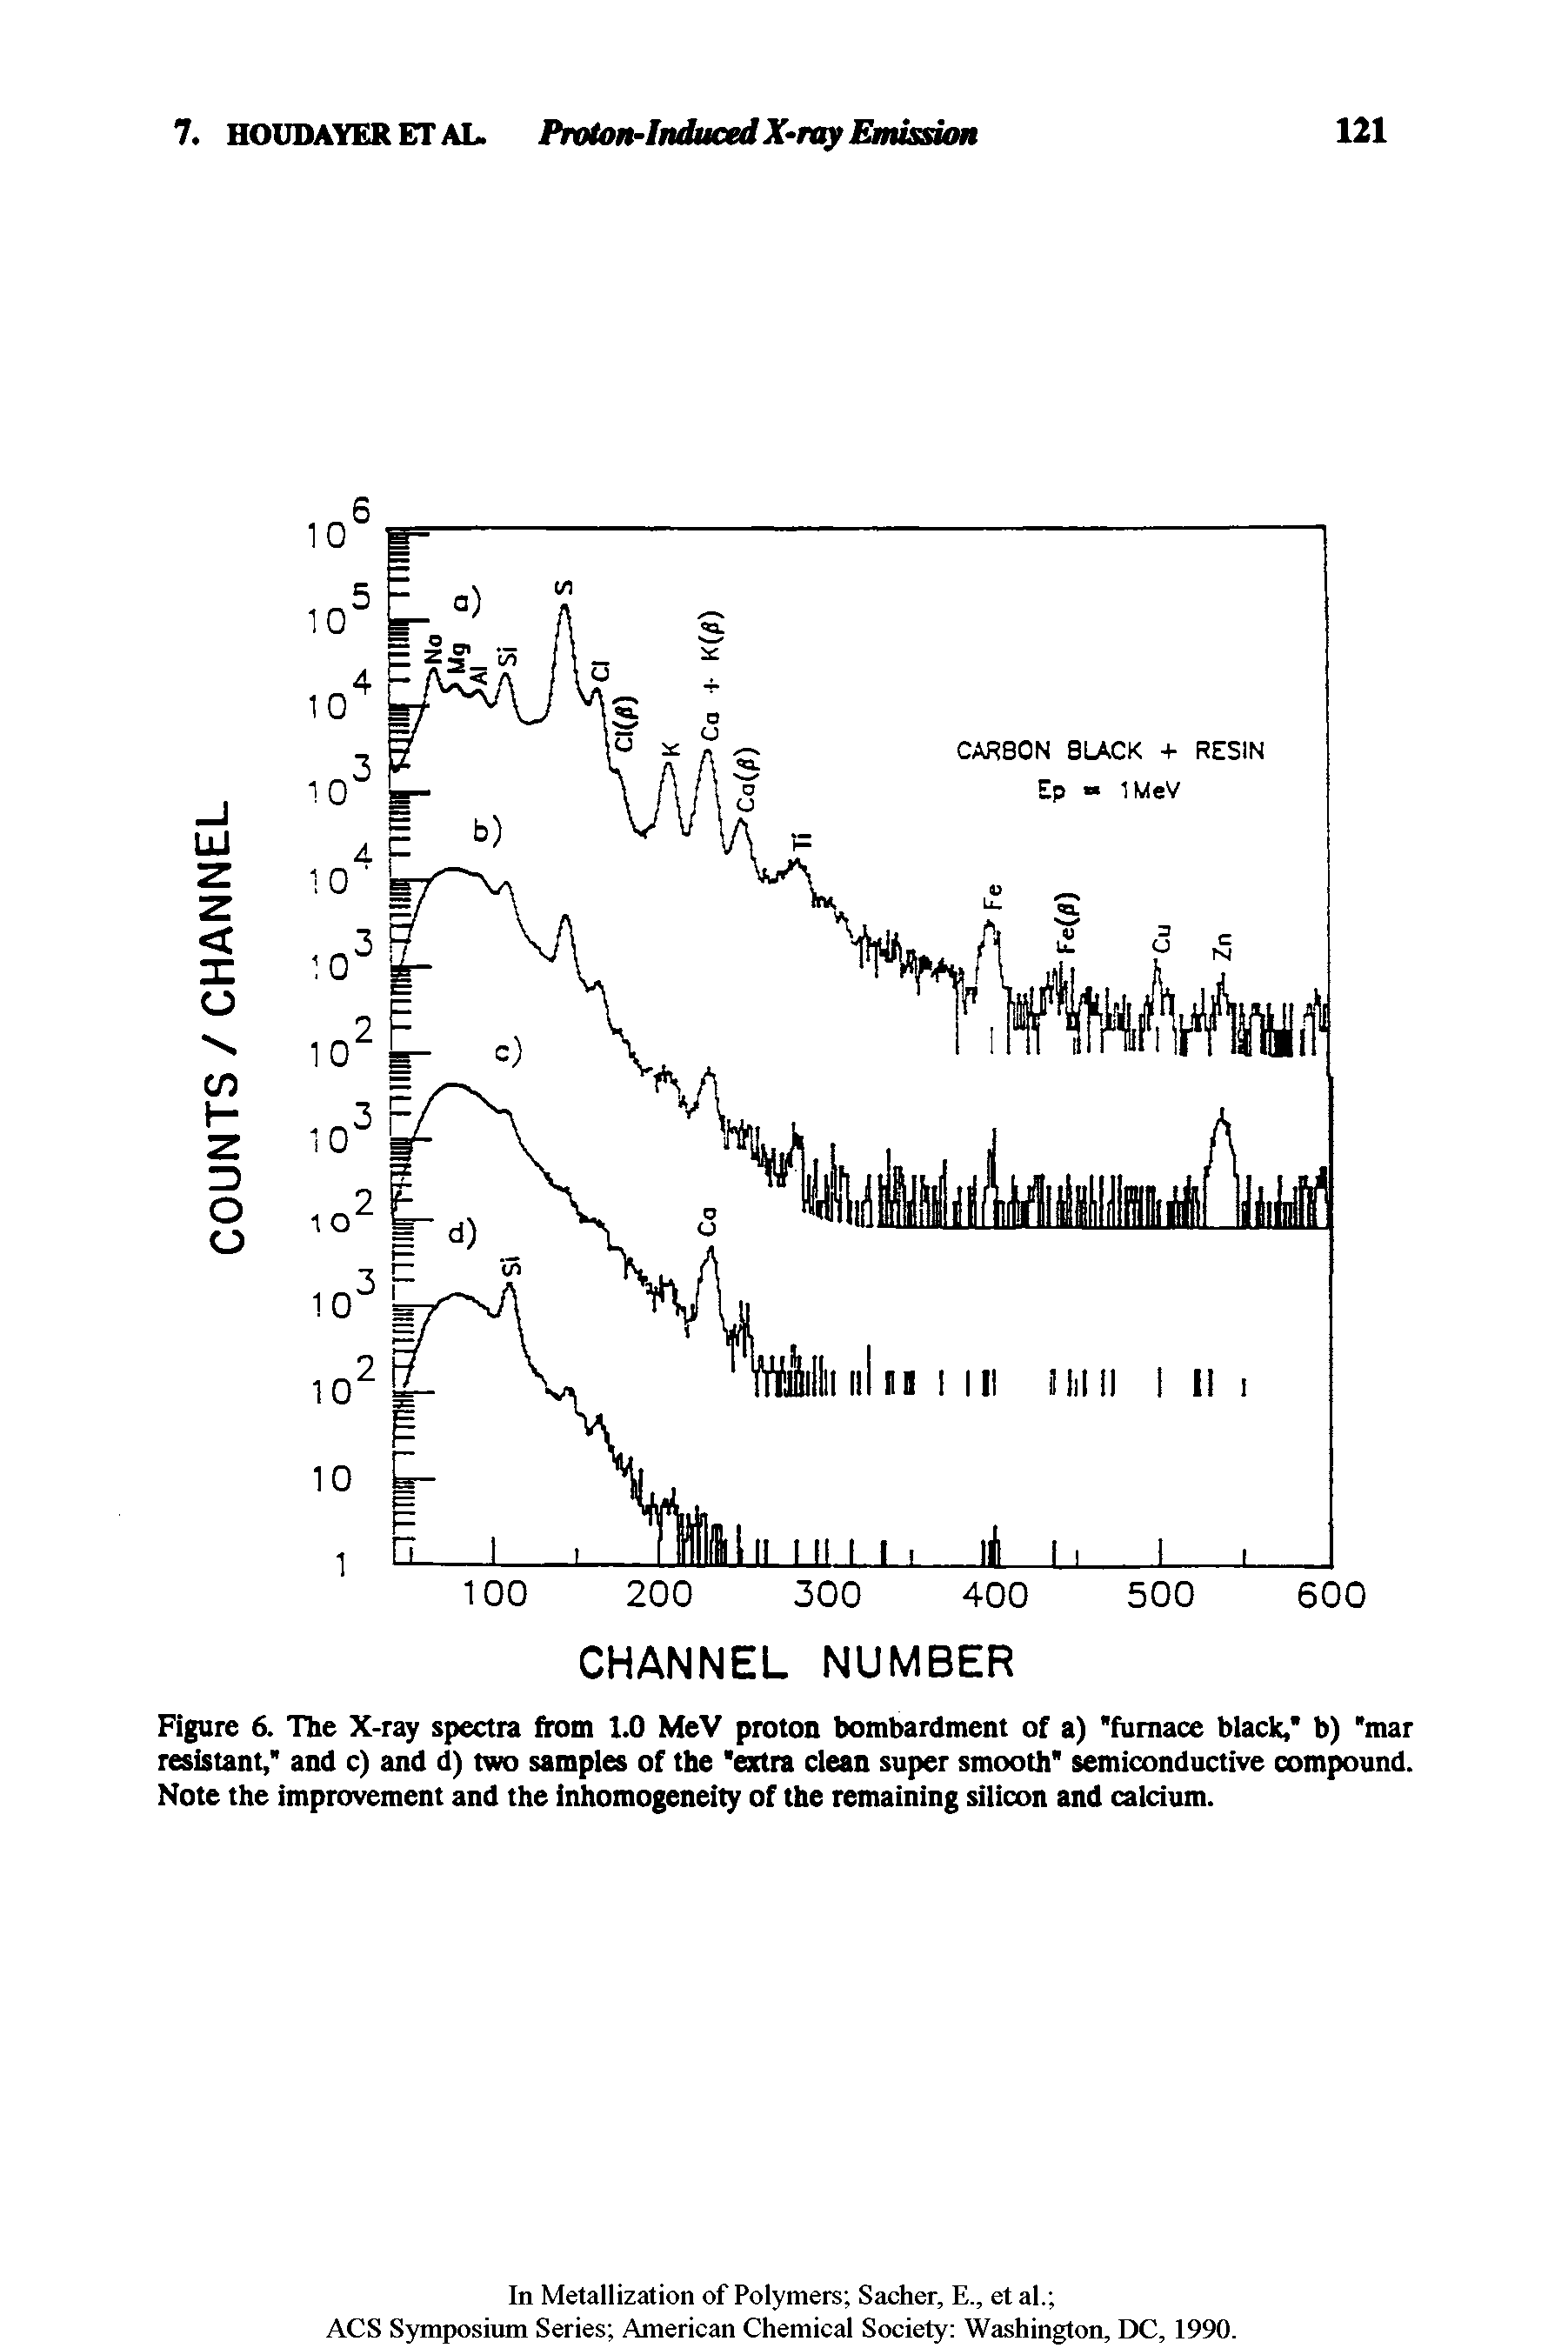 Figure 6. The X-ray spectra firom 1.0 MeV proton bombardment of a) furnace black, b) mar resistant, and c) and d) two samples of the extra clean super smooth semiconductive compound. Note the improvement and the inhomogeneity of the remaining silicon and calcium.